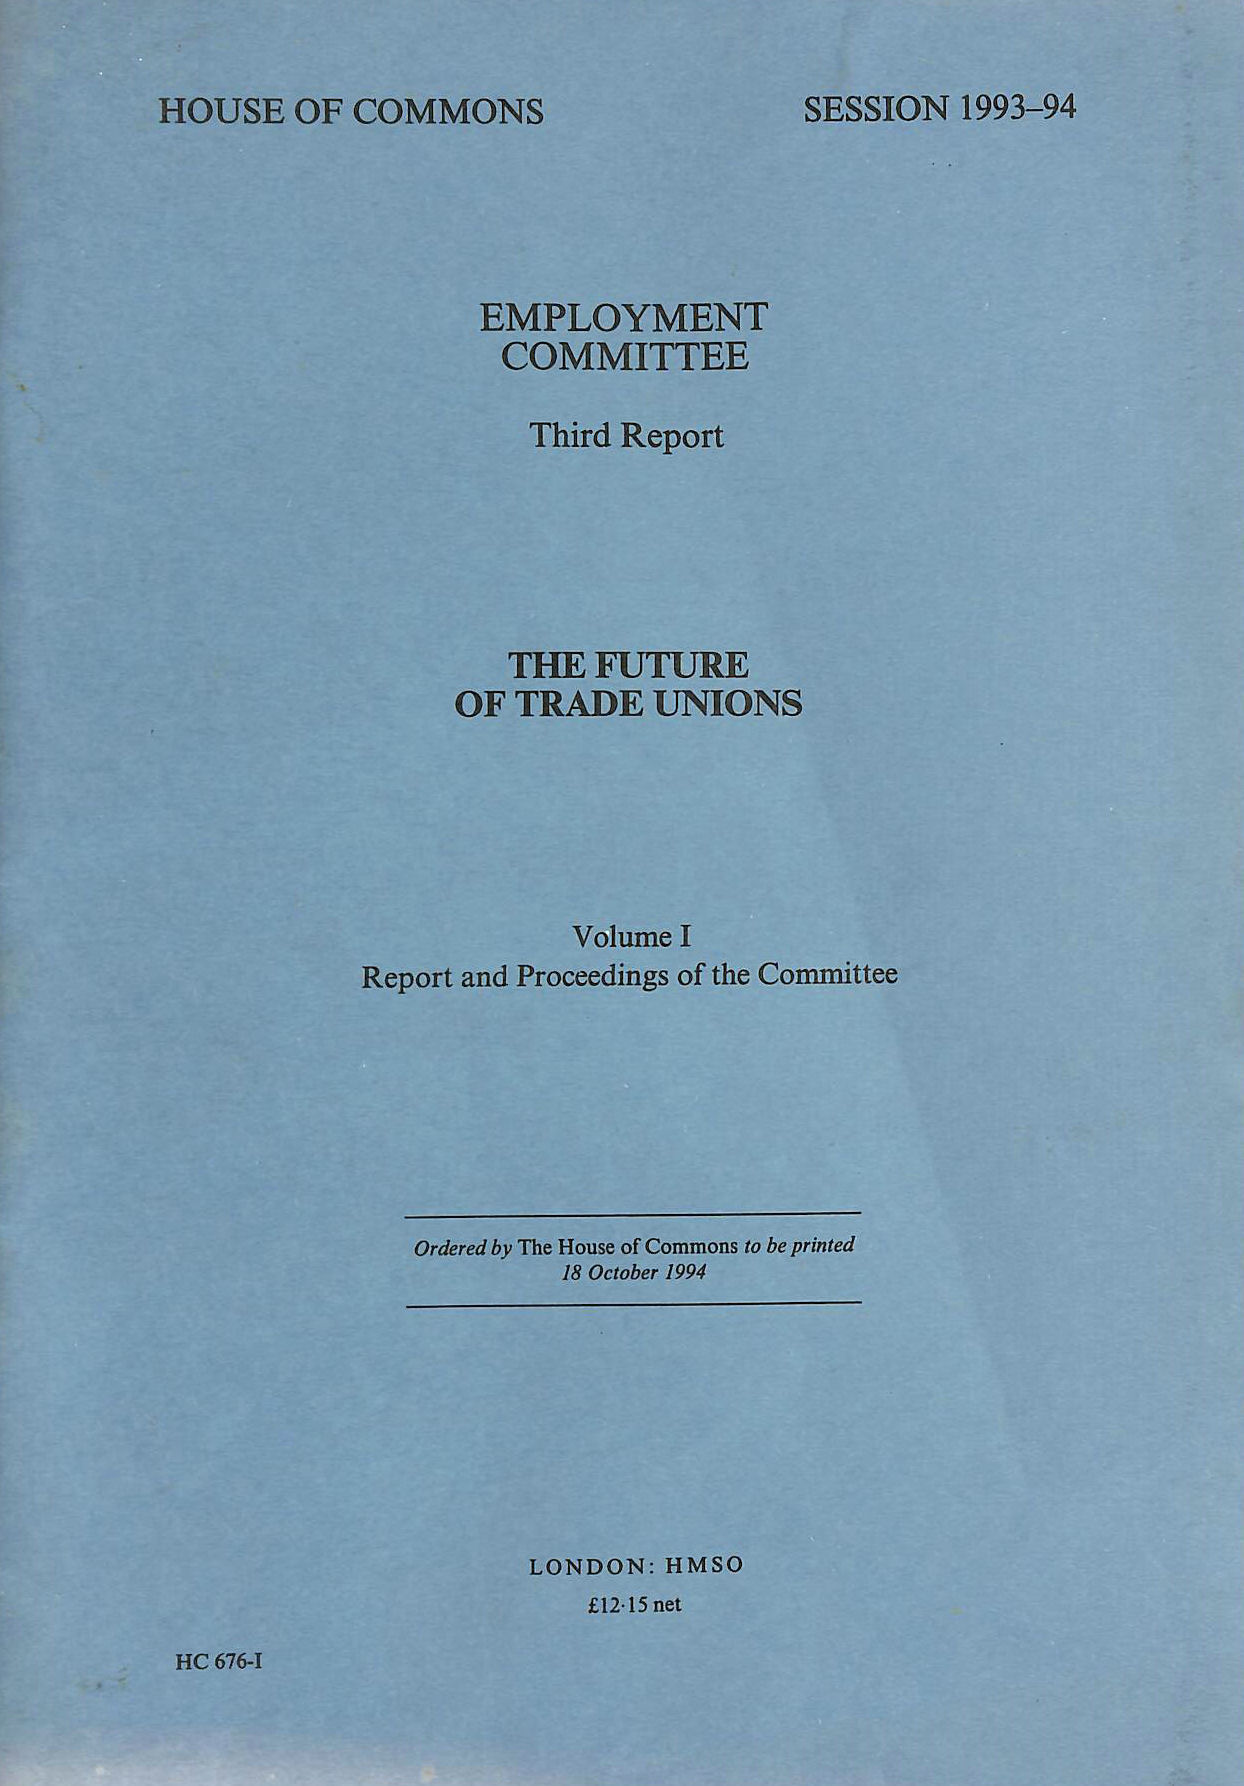 HOUSE OF COMMONS EMPLOYMENT COMMITTEE - The Future of Trade Unions Report Volume I. Third Report